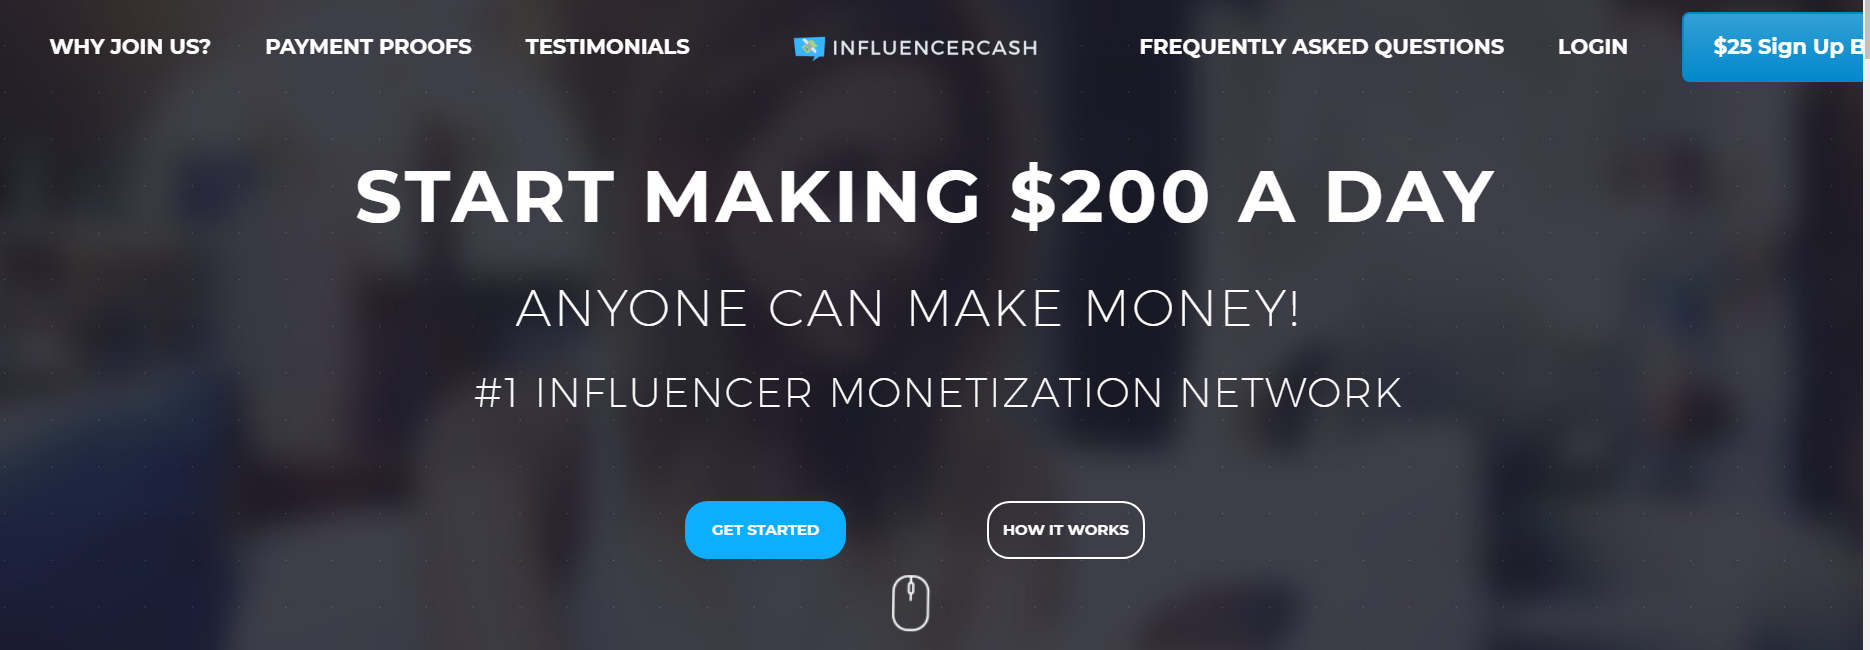 homepage influencer cash.co